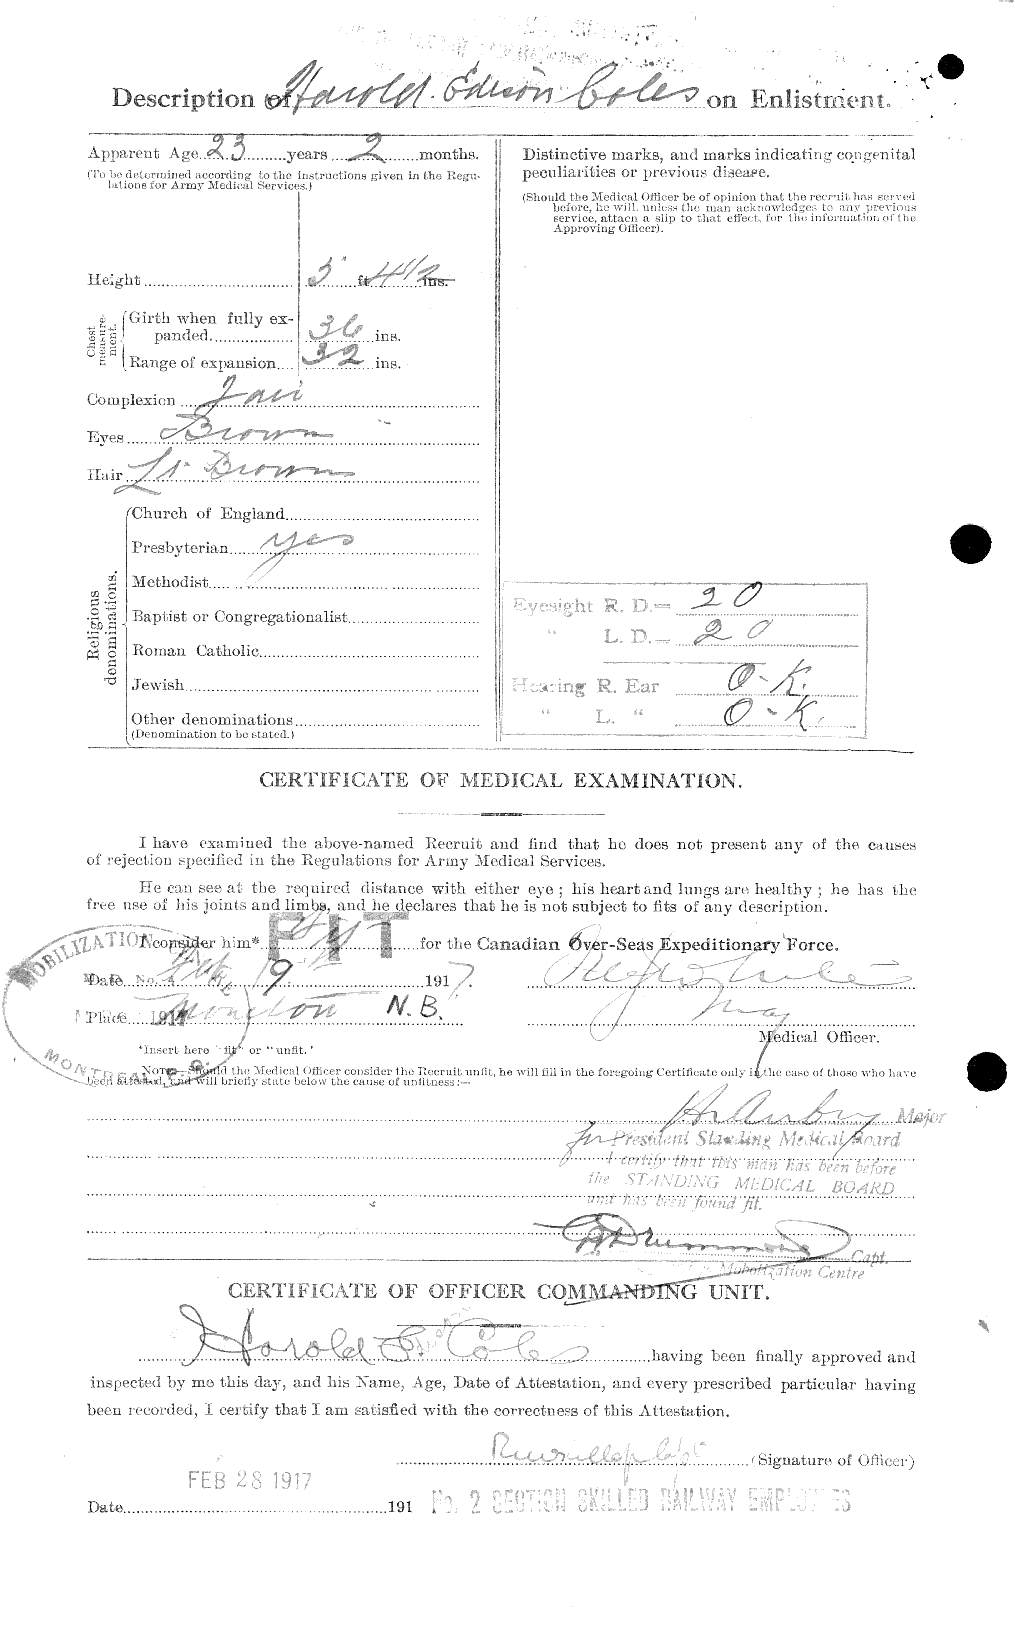 Personnel Records of the First World War - CEF 028375b